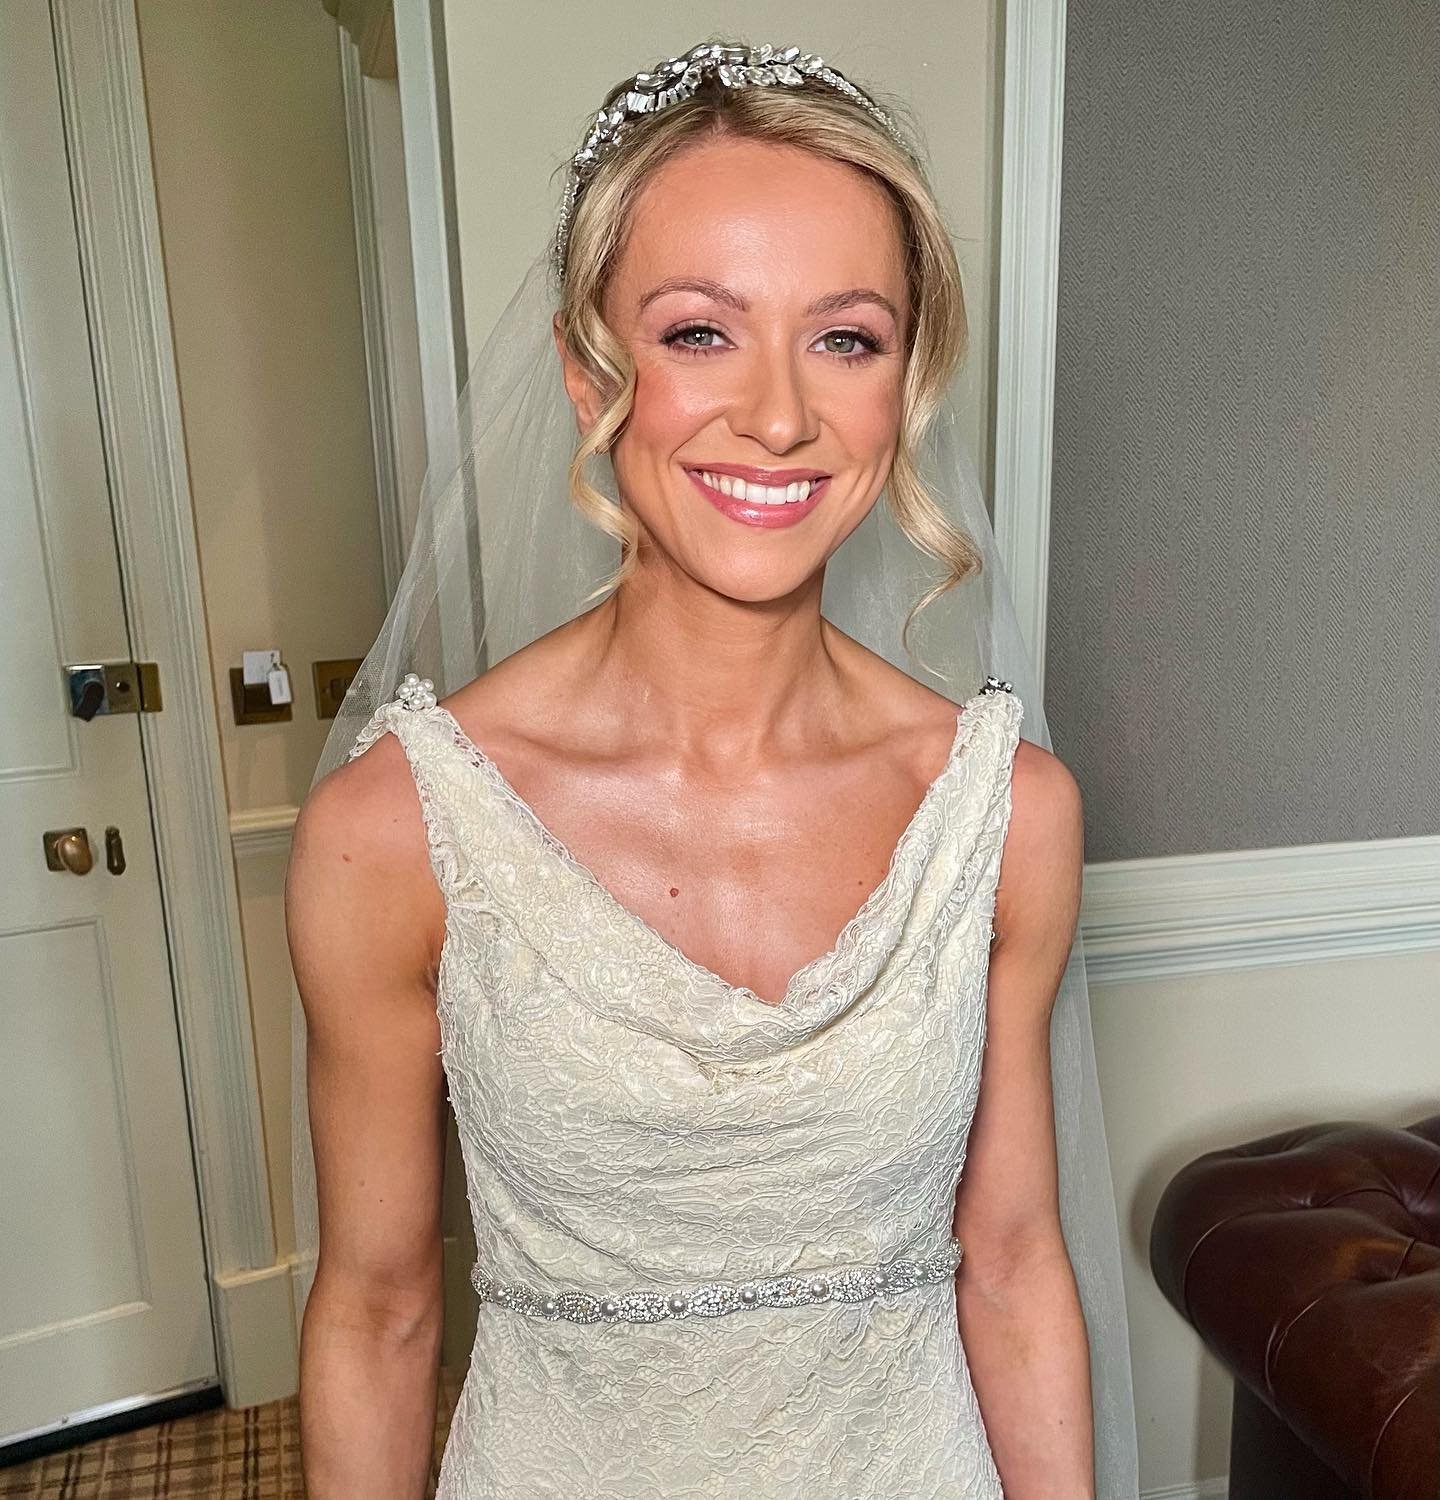 ✨Mhari  Claire✨

As Mhairi&rsquo;s trusted skincare/brow/makeup  specialist 😆
we tailored a plan for her on the lead up to her big day. 

Picture-perfect skin doesn&rsquo;t happen overnight, which is why we devised a comprehensive plan incorporating